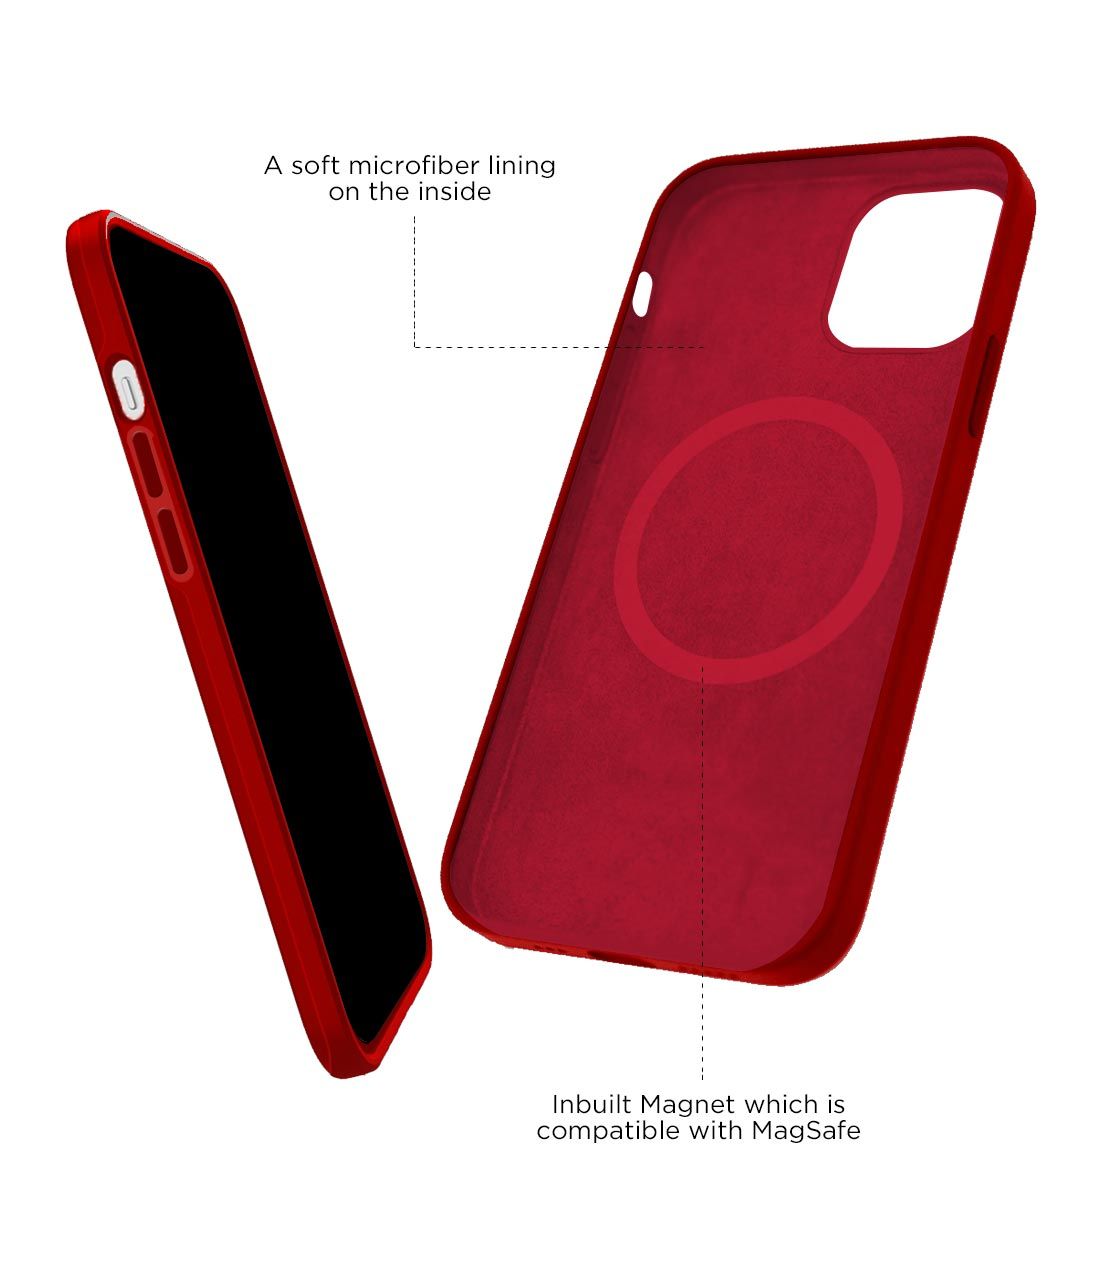 Apple iPhone 12 Mini (PRODUCT)RED Silicone Case with MagSafe